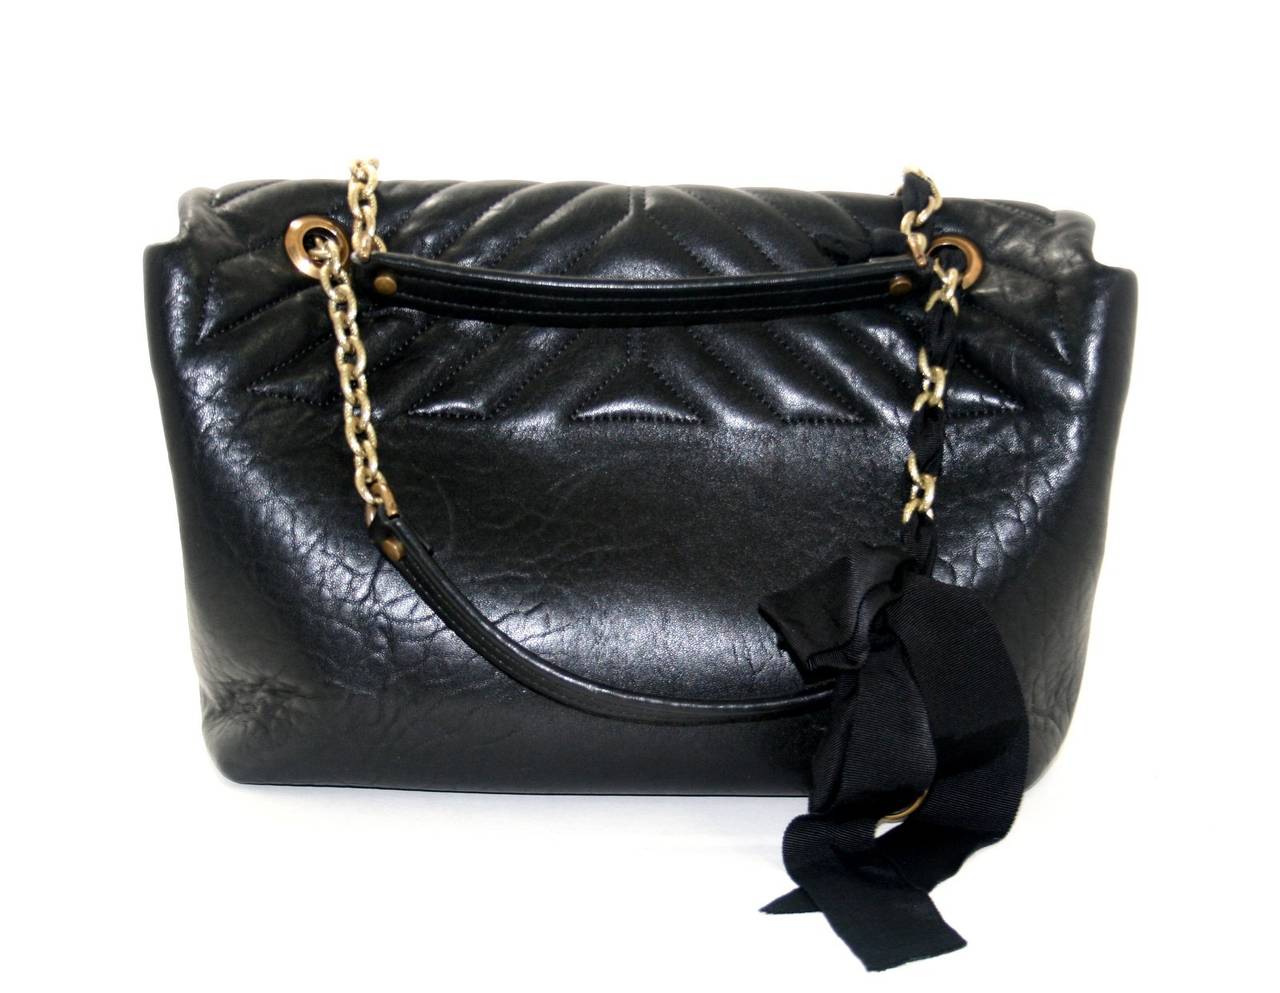 Lanvin’s Black Lambskin Large Happy Bag is in pristine condition.  A former store display, this iconic style is a brilliant find for a savvy shopper; it retails for over $2,780.00 with taxes. 
Black lambskin is quilted in a chevron pattern and